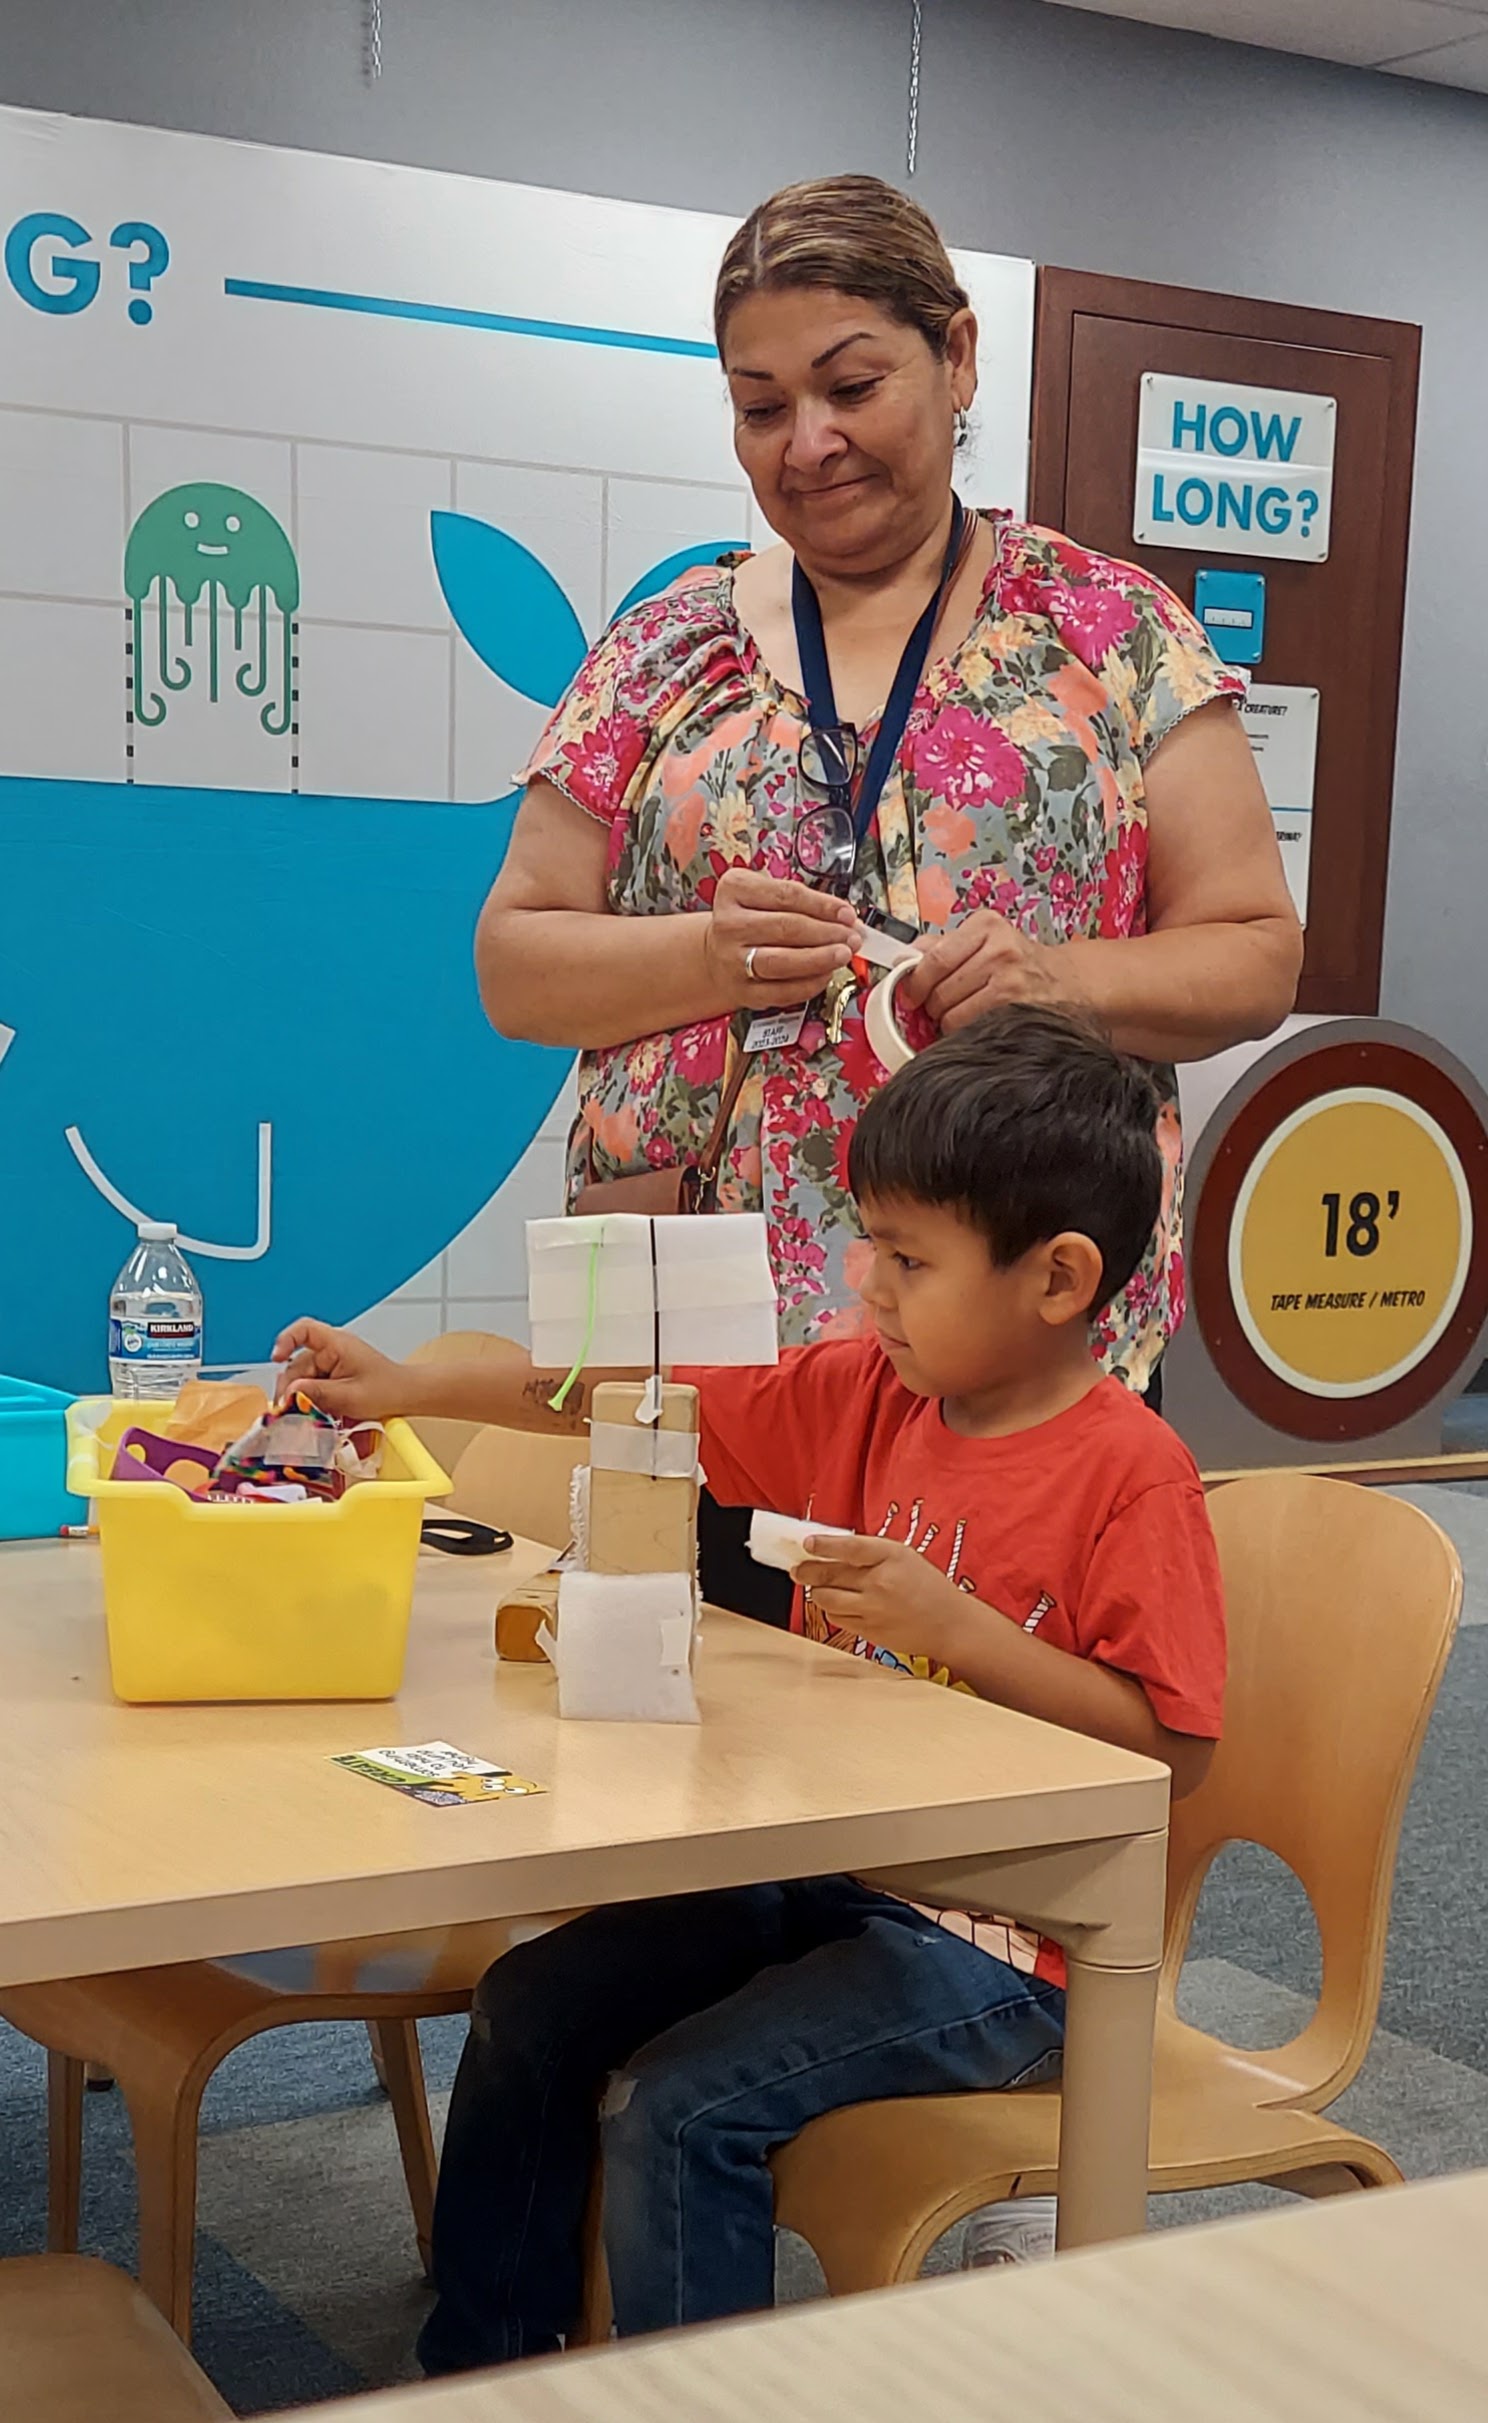 A boy builds a science experiment, reaching for another part from a yellow box, while a teacher watches over his shoulder, smiling